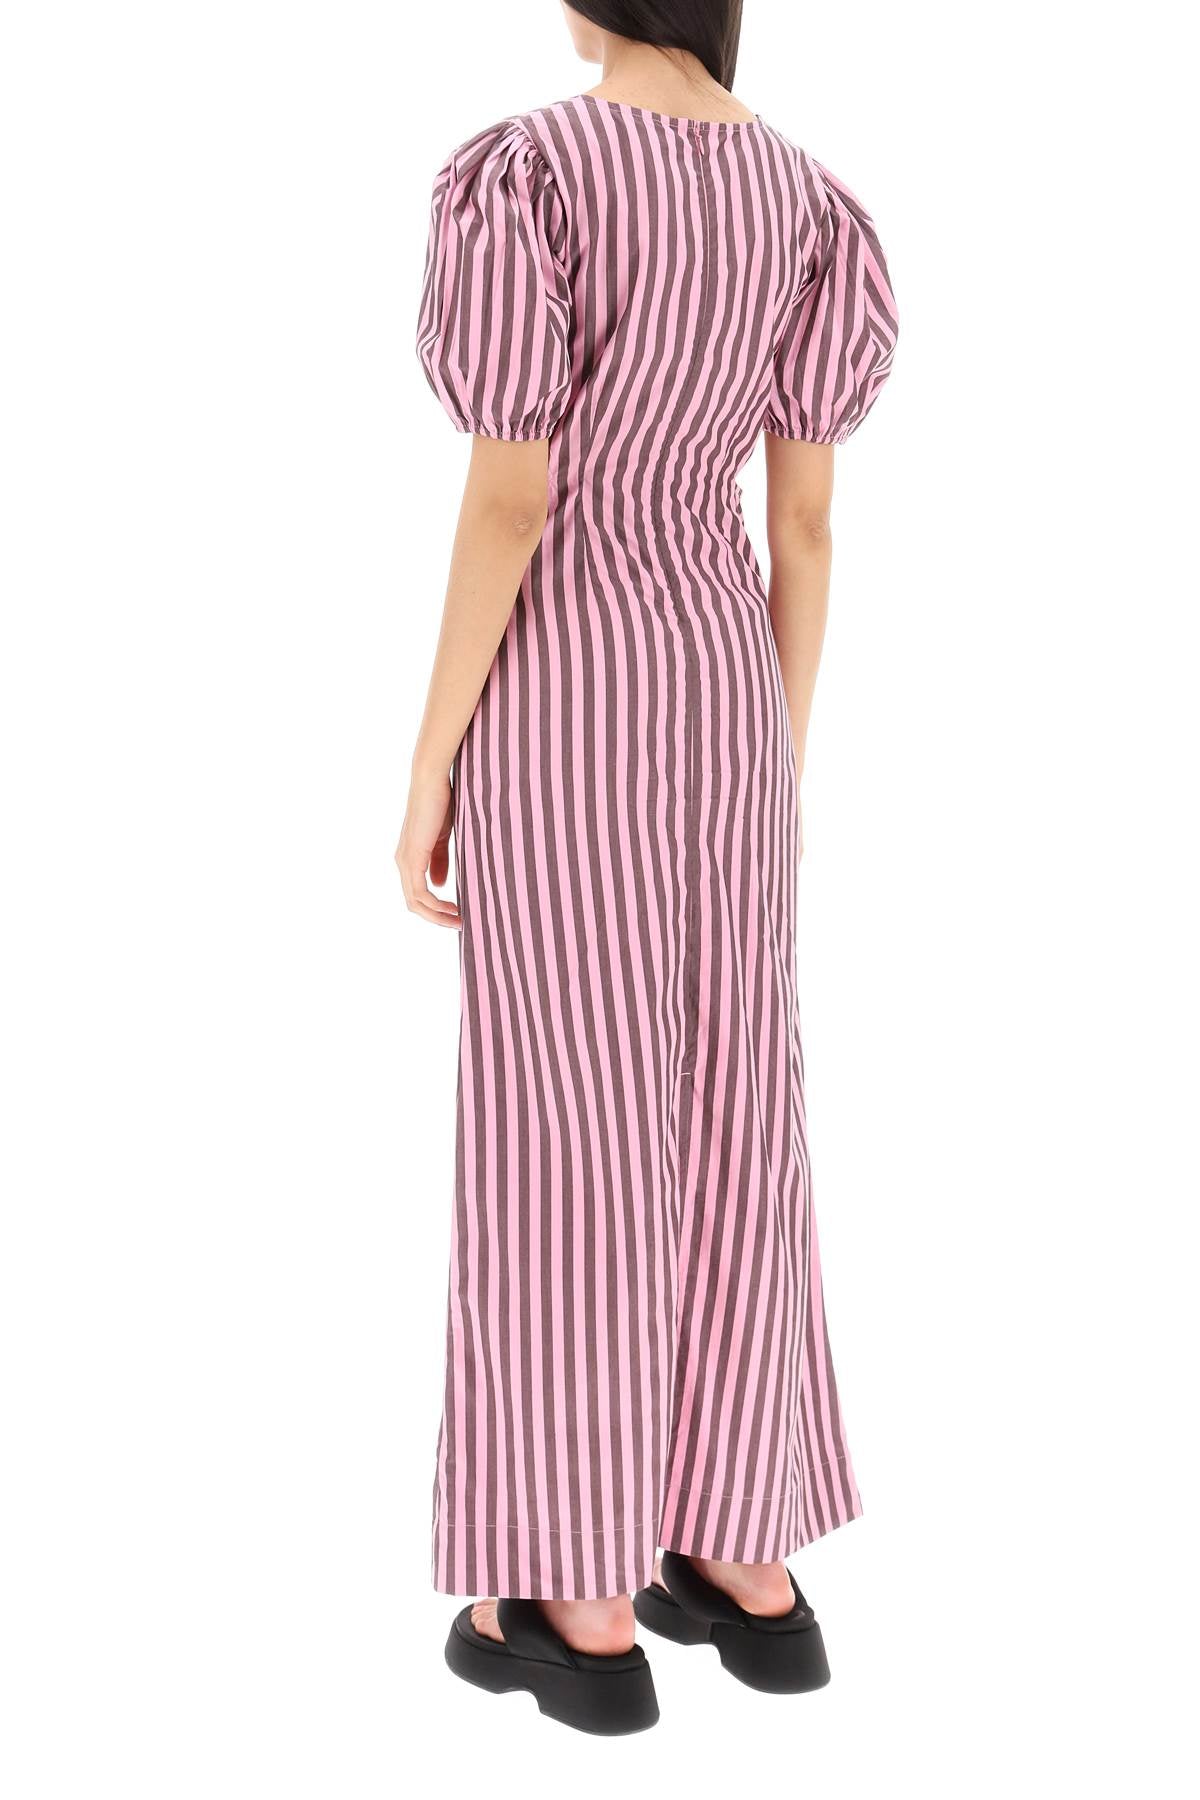 Ganni striped maxi dress with cut-outs-2